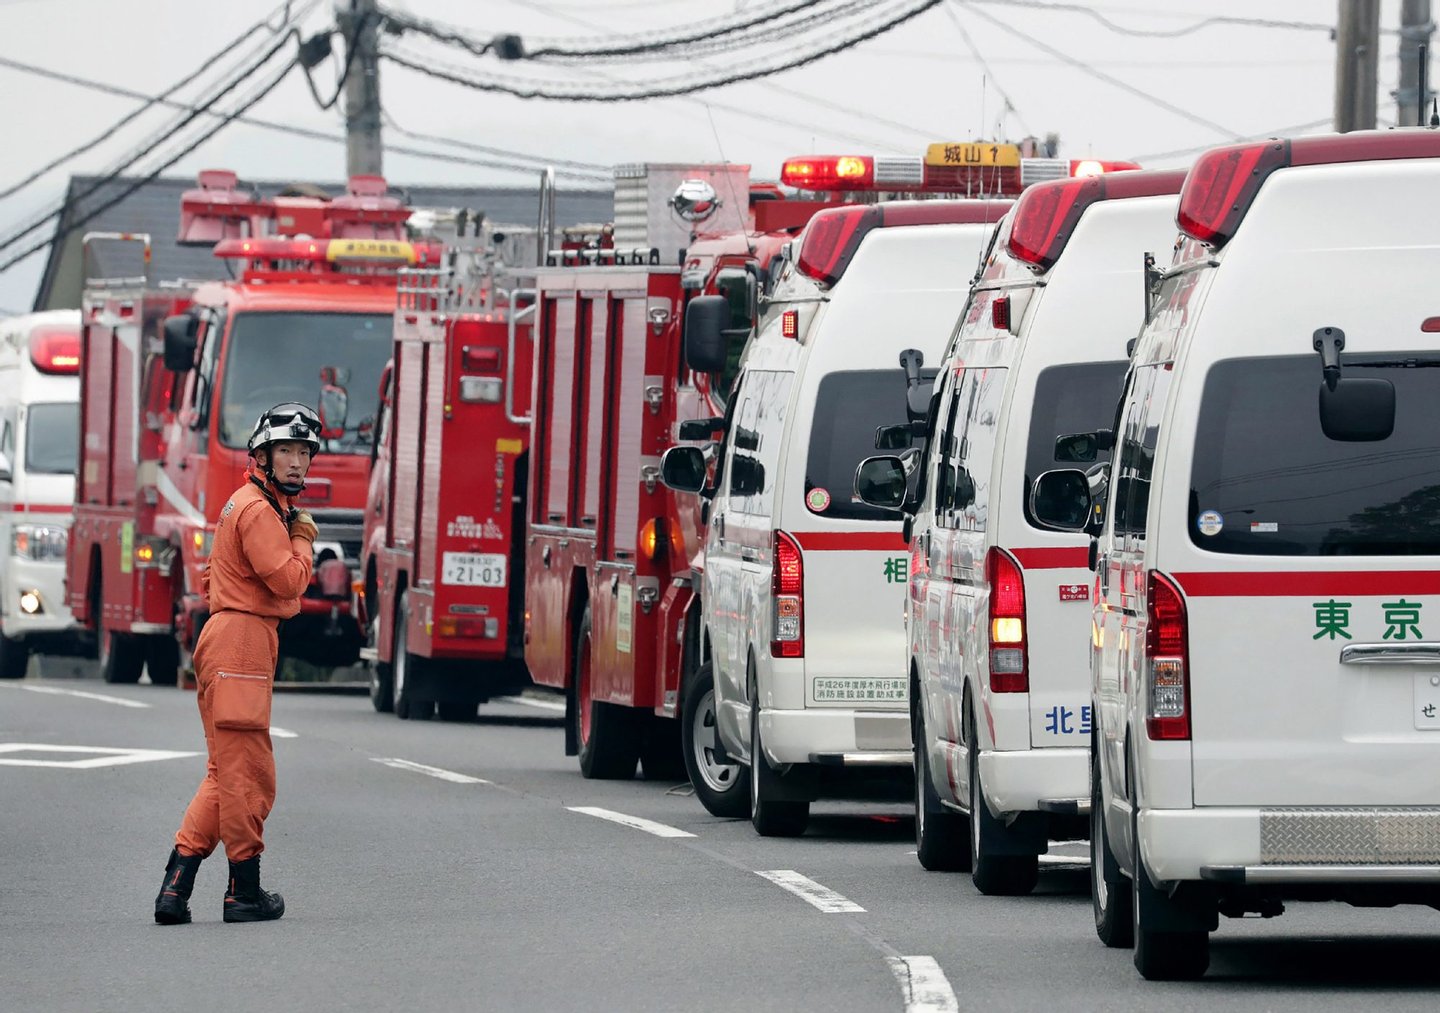 A rescue worker stands by beside ambulances near the Tsukui Yamayuri En care centre where a knife-wielding man went on a rampage in the city of Sagamihara, Kanagawa prefecture, some 50 kms (30 miles) west of Tokyo on July 26, 2016. At least 19 people were killed when the man went on a rampage at the care centre for the mentally disabled in Japan early on July 26, a fire official said. / AFP / JIJI PRESS / JIJI PRESS / Japan OUT (Photo credit should read JIJI PRESS/AFP/Getty Images)